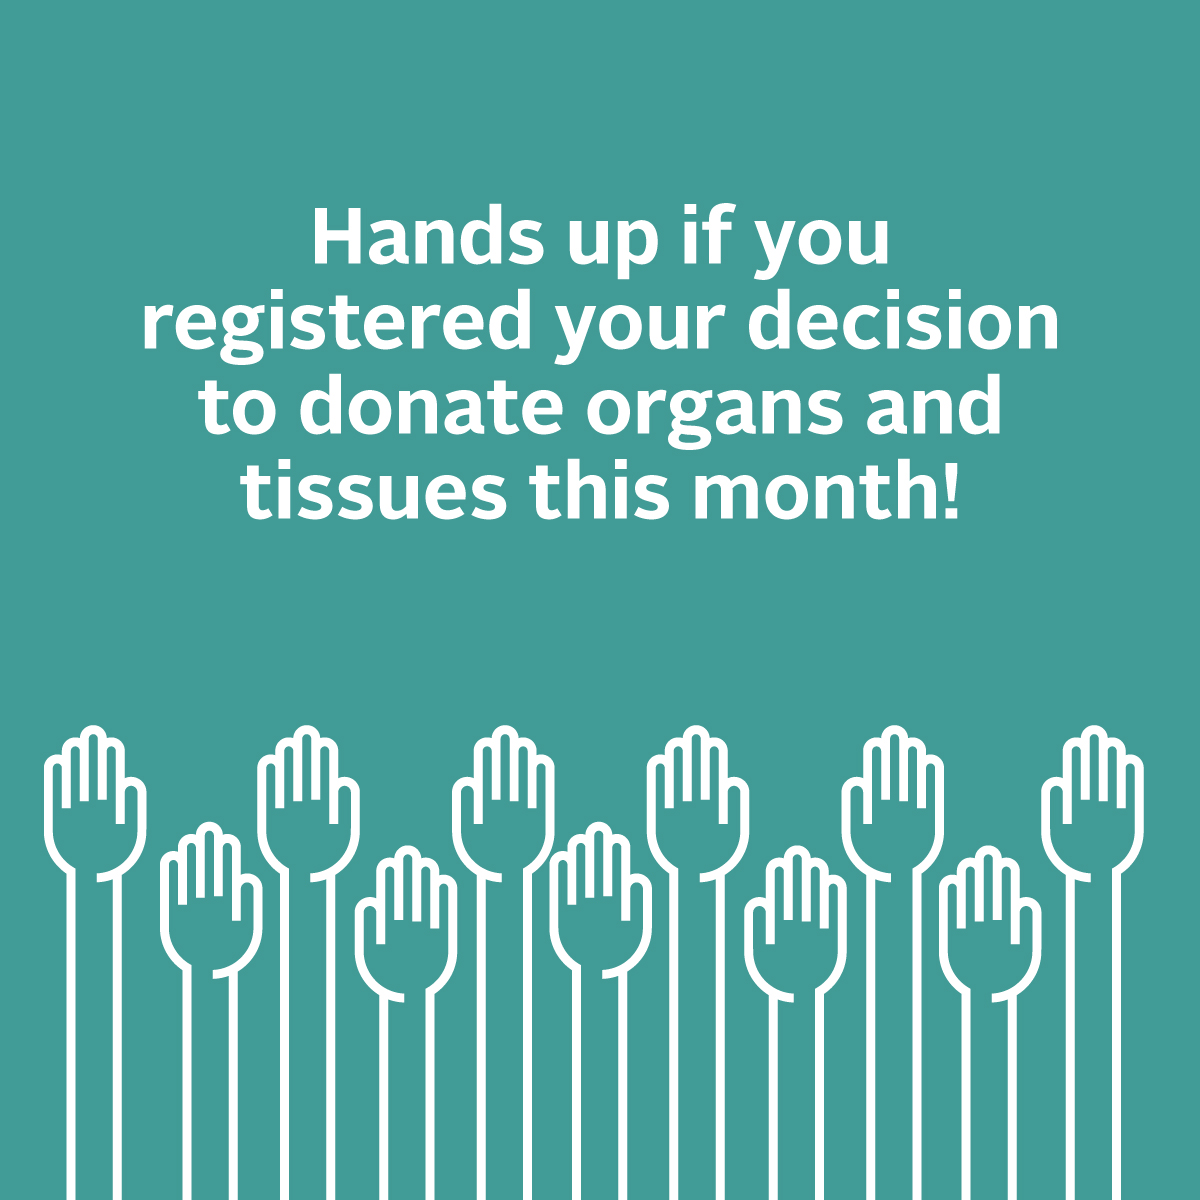 Hands up if you learned more about organ and tissue donation, or registered your intent to donate and talked to your family! Let’s see those hands up in the comments! 🙌